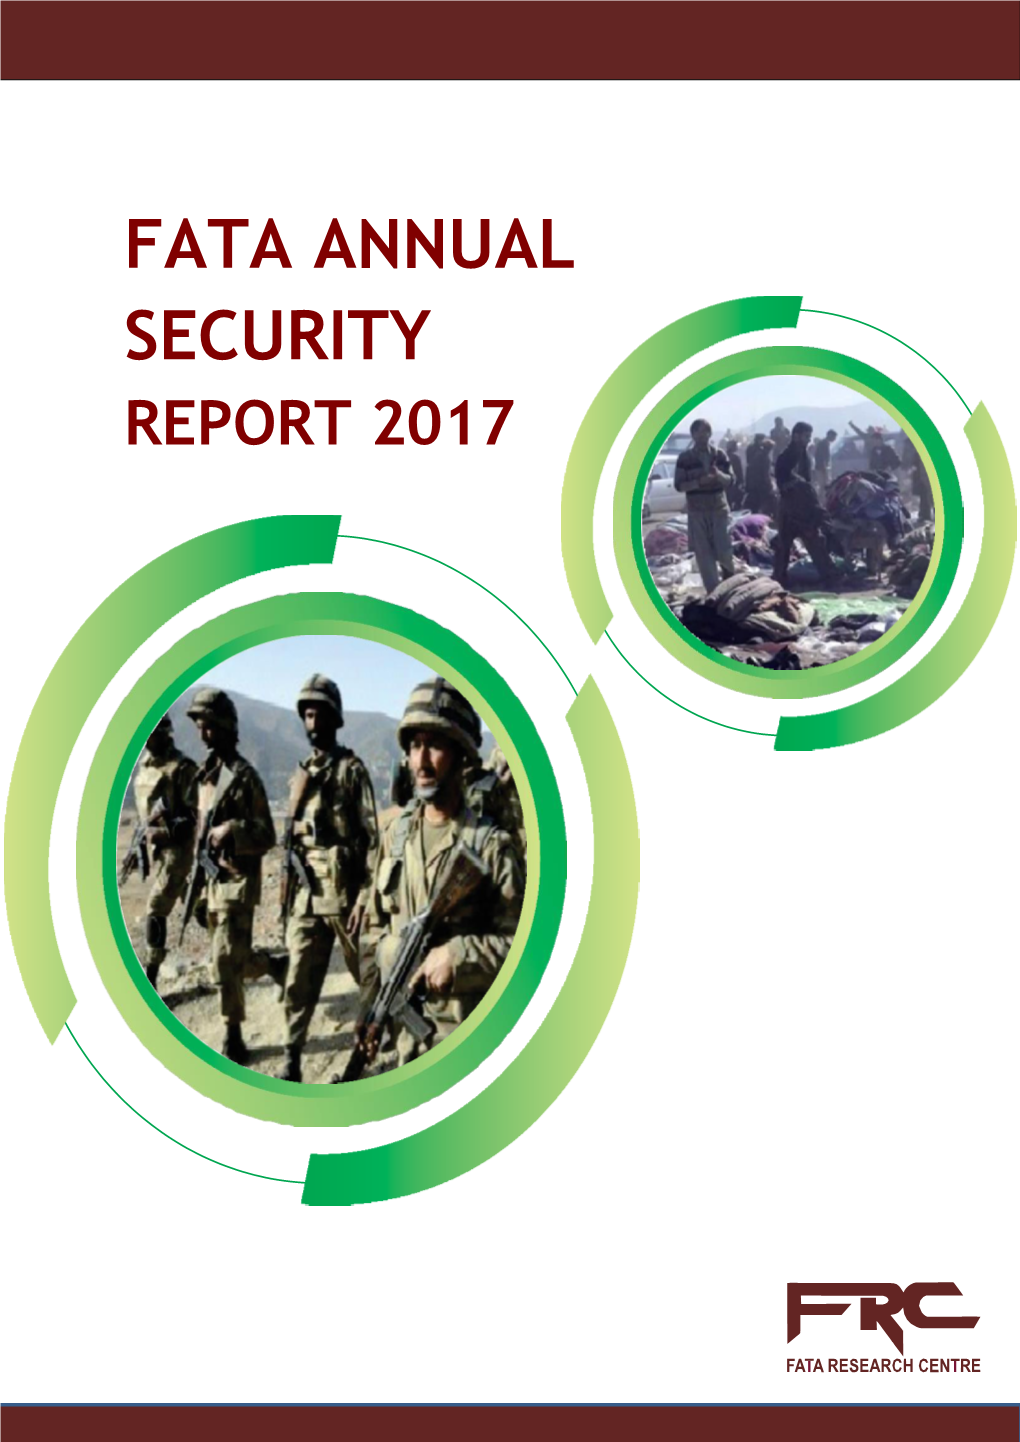 To Download Fata Annual Security Report 2017